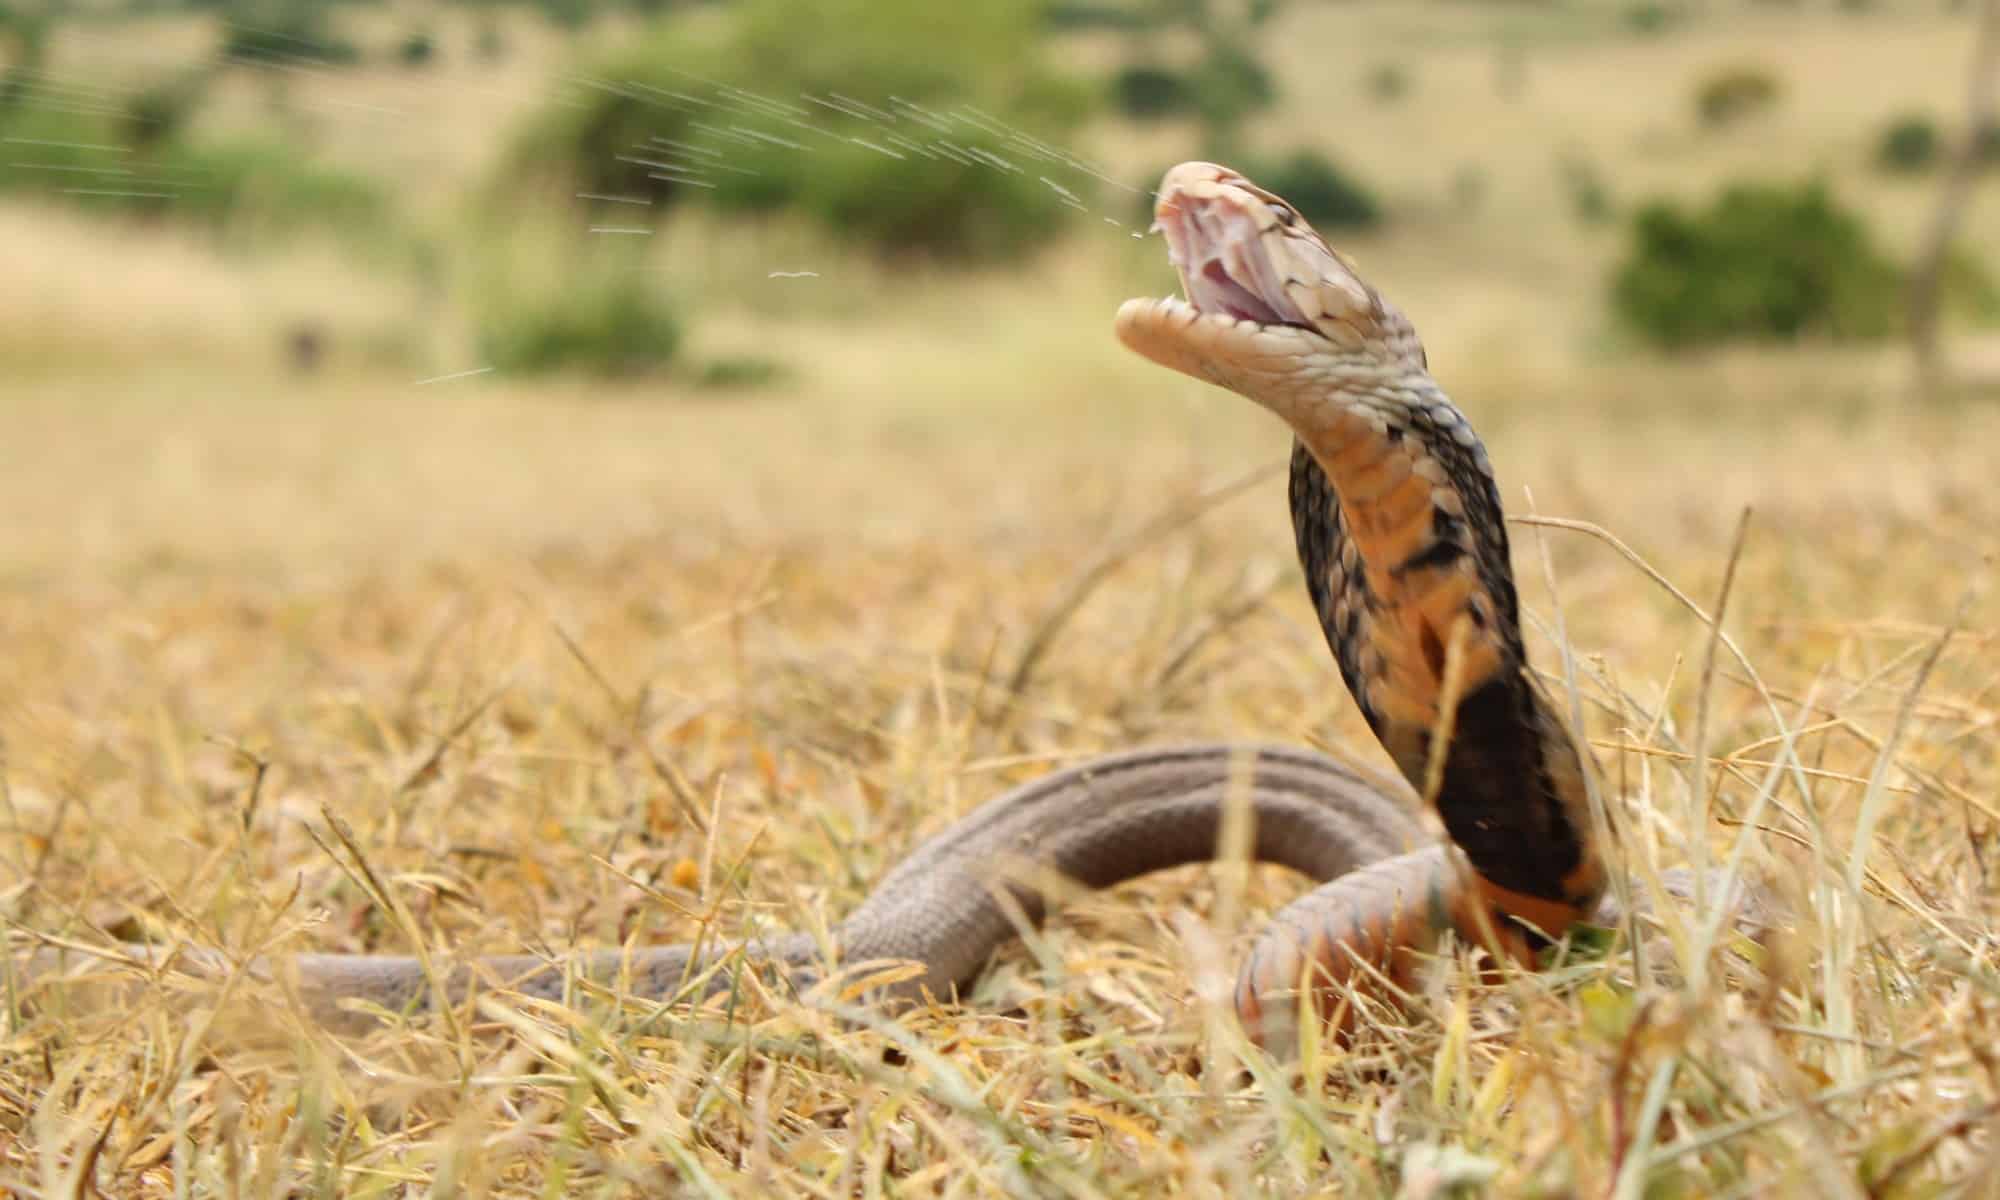 Mozambique spitting cobra is so named because it projects venom from its fangs into its attacker's eyes, which can cause vision problems or blindness.